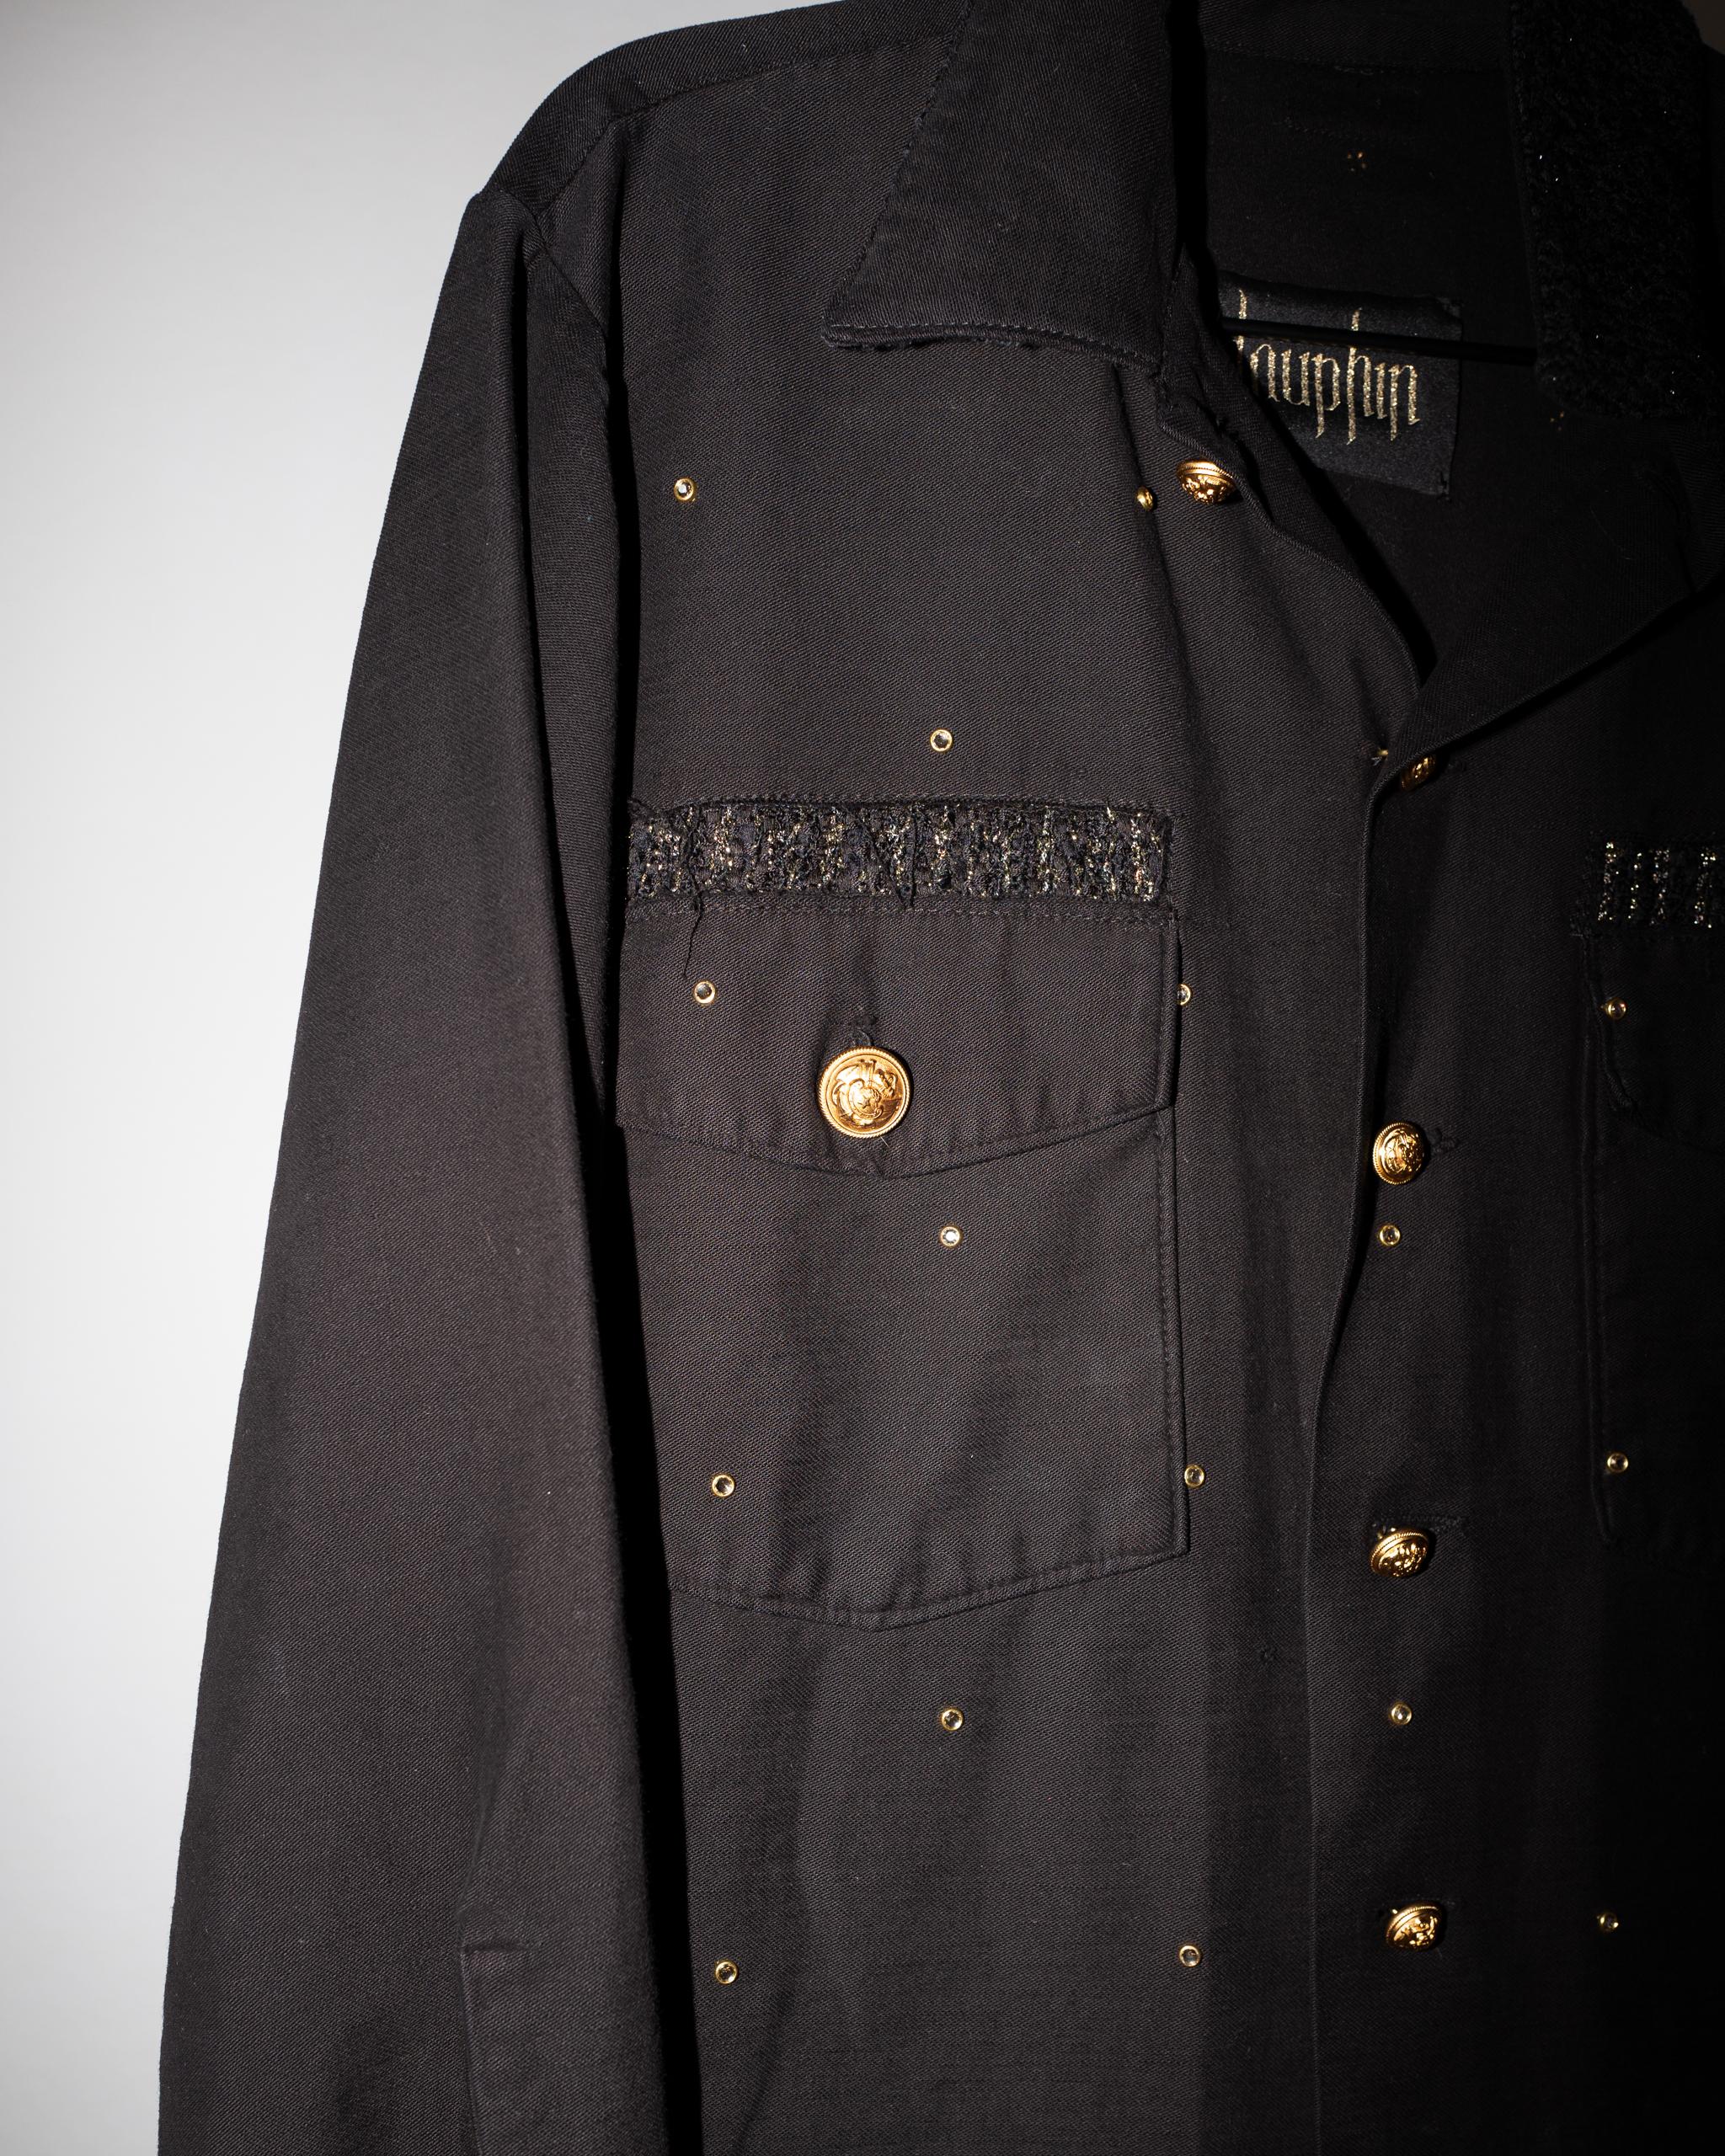 Vintage one of a kind Remade Military Us Jacket Dyed Black with Swarovski Crystal Embellishment and Gold Lurex Black Tweed above pockets, Vintage Gold plated Brass Buttons from Paris around the 40